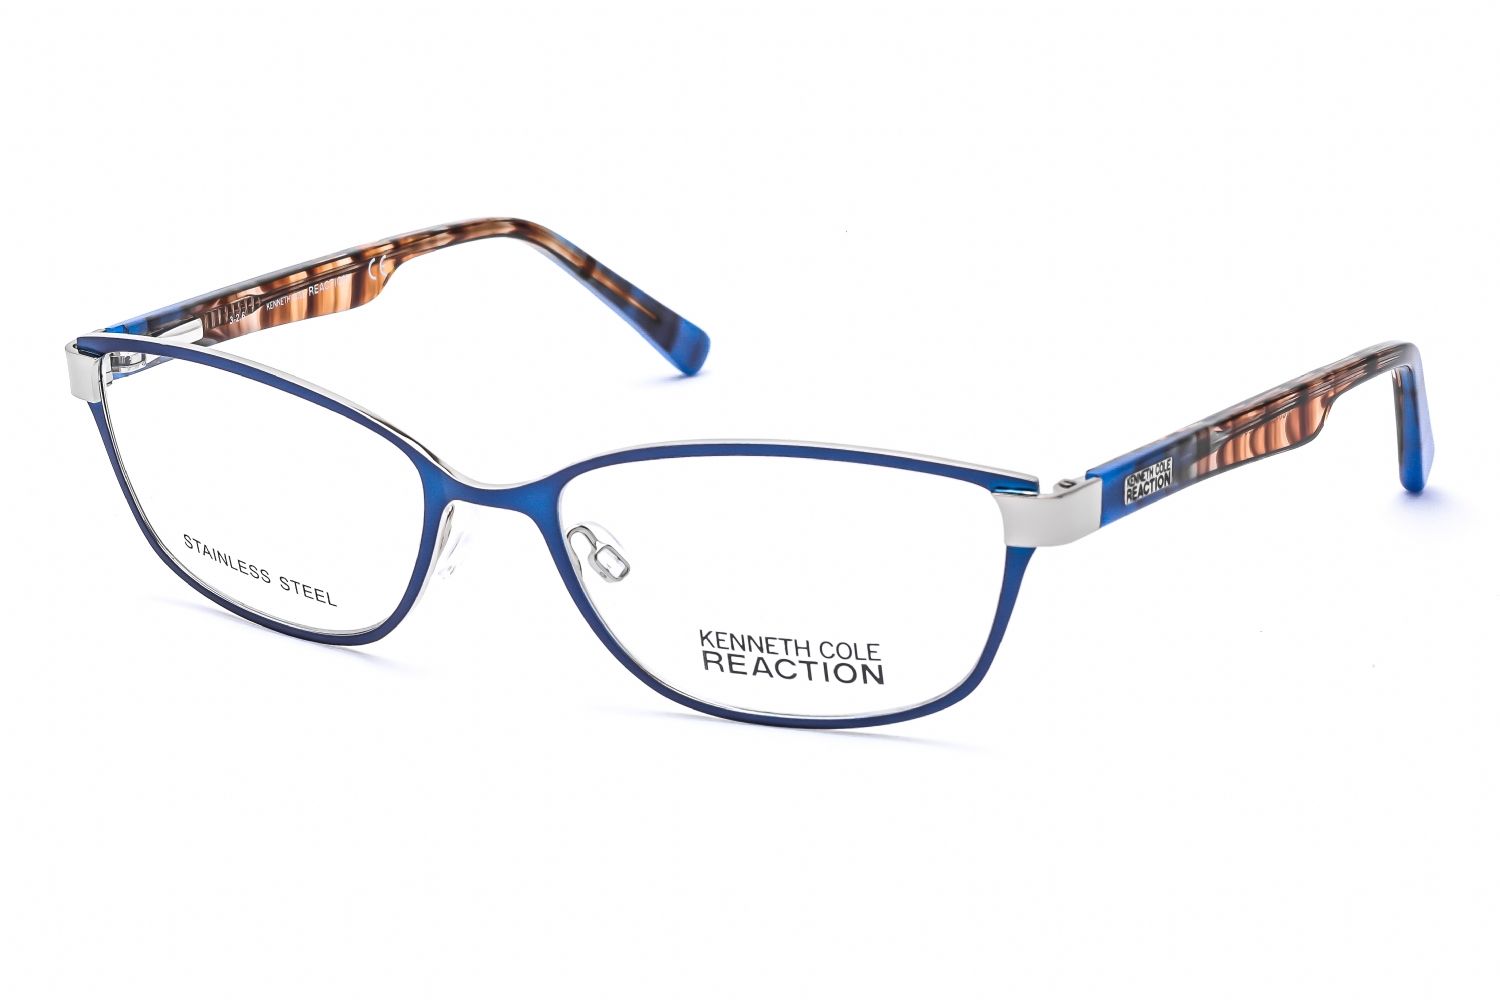 Style: Kenneth Cole Reaction KC0758 Eyeglasses Blue/other / Clear Lens Brand: Kenneth Cole Reaction Frame Style: Rectangular Frame Material: metal Color : Blue/other / Clear Lens Women Eyeglasses